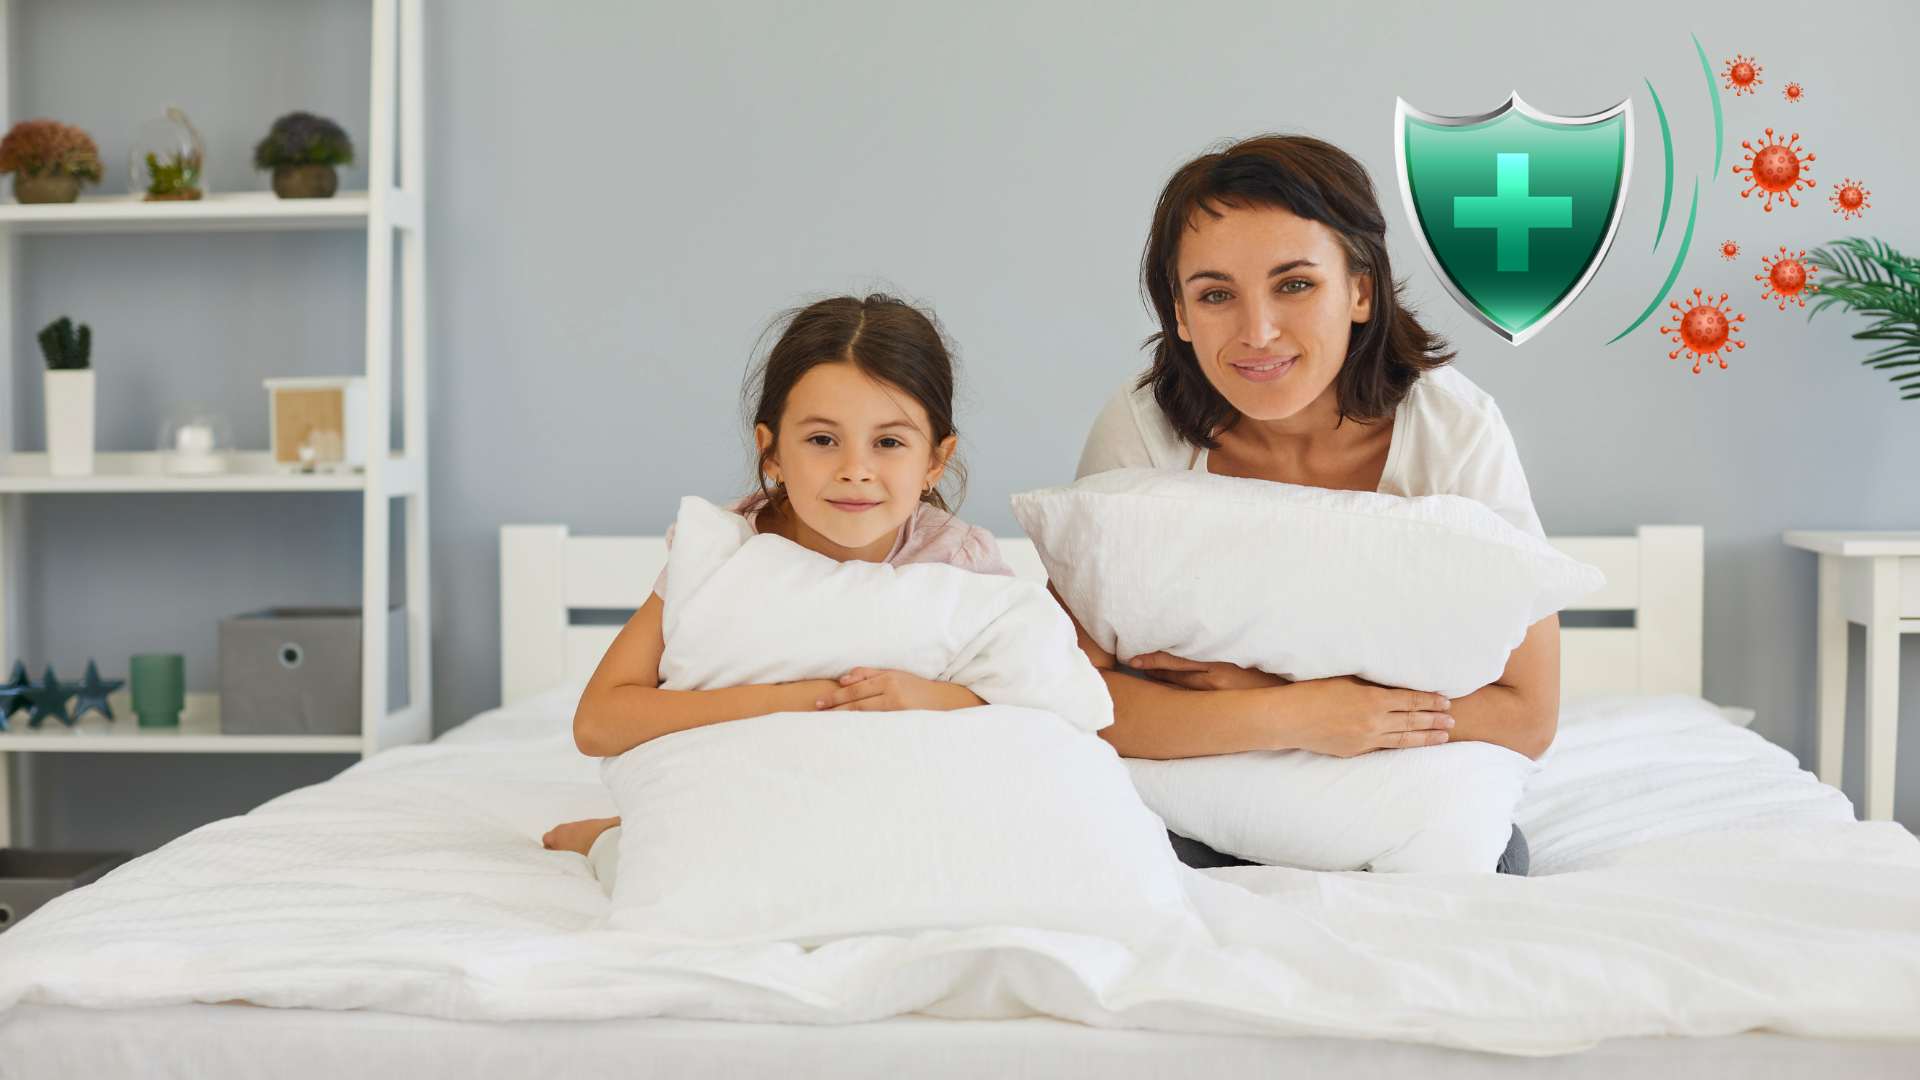 Mom and daughter smile while sitting up on a Viroclean® custom mattress. Green shield icon in top right corner signifies antiviral protection.